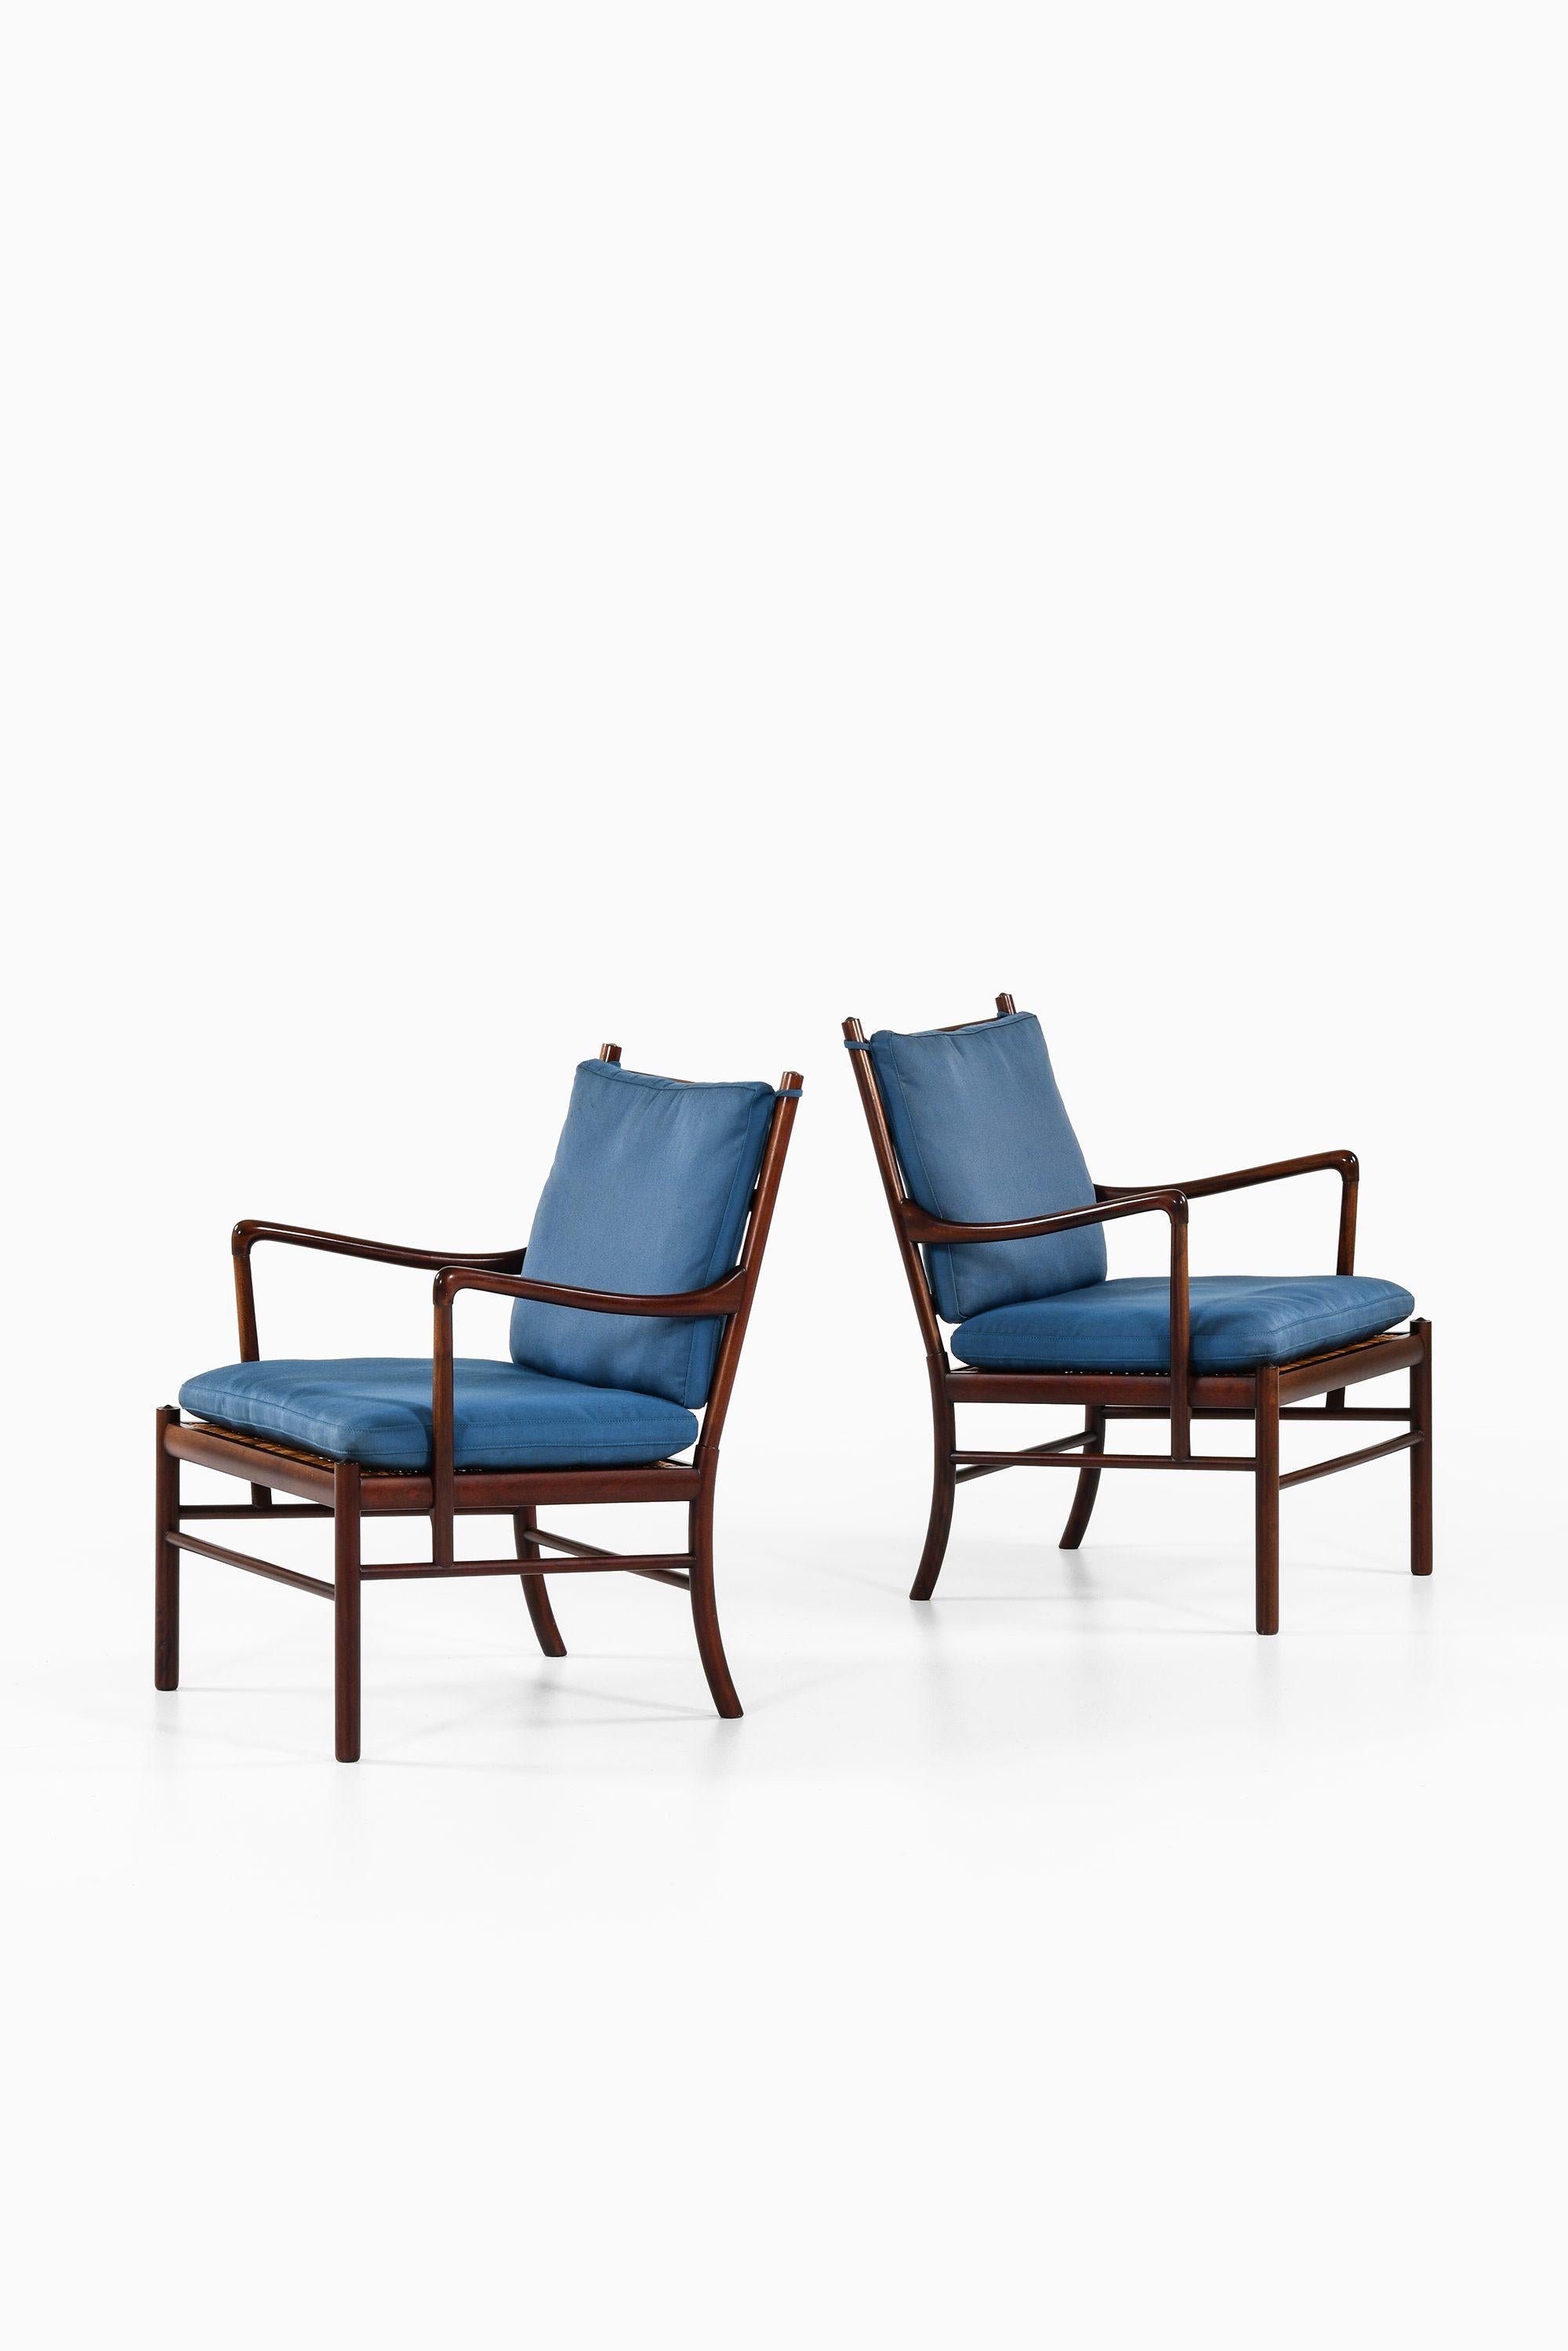 Pair of Easy Chairs in Mahogany, Woven Cane and Original Fabric by Ole Wanscher, 1960's

Additional Information:
Material: Mahogany, woven cane and original fabric
Style: Mid century, Scandinavia
Rare pair of easy chairs model Colonial
Produced by